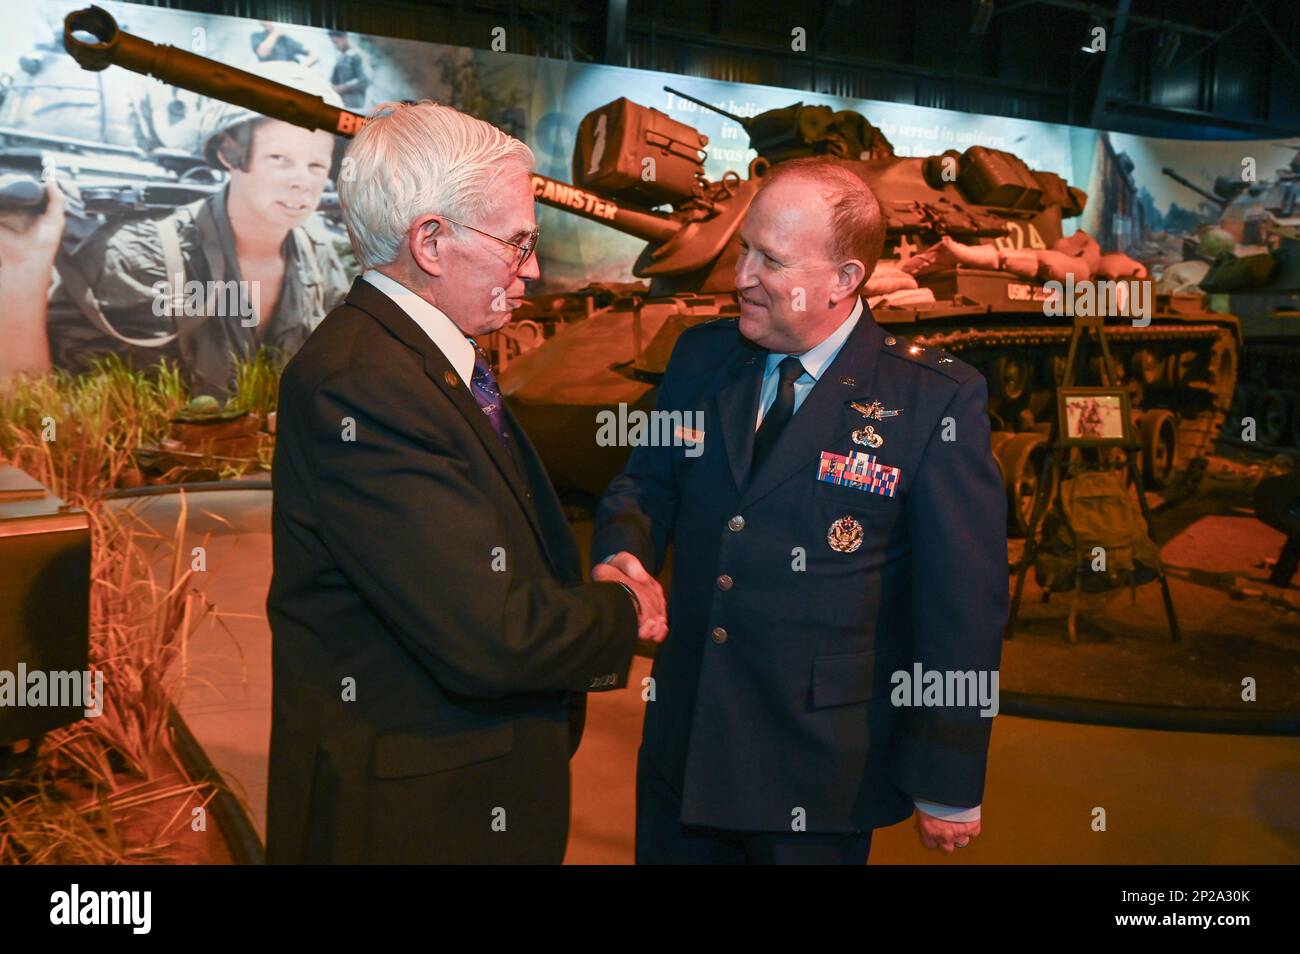 Maj. Gen. Anthony Genatempo, right, program executive officer, Command, Control, Communications, Intelligence and Networks, introduces himself to retired U.S. Air Force Col. Michael Brazelton during the grand opening of the Hanoi Hilton Vietnam Exhibit at The American Heritage Museum, Hudson, Mass., Feb 11. The exhibit featured two original cells from Hỏa Lò prison, also known as the 'Hanoi Hilton,” in North Vietnam. Brazelton’s aircraft was shot down on Aug. 7, 1966 on his 120th combat mission over Thai Nguyen. He spent more than six years as a prisoner of war. Stock Photo